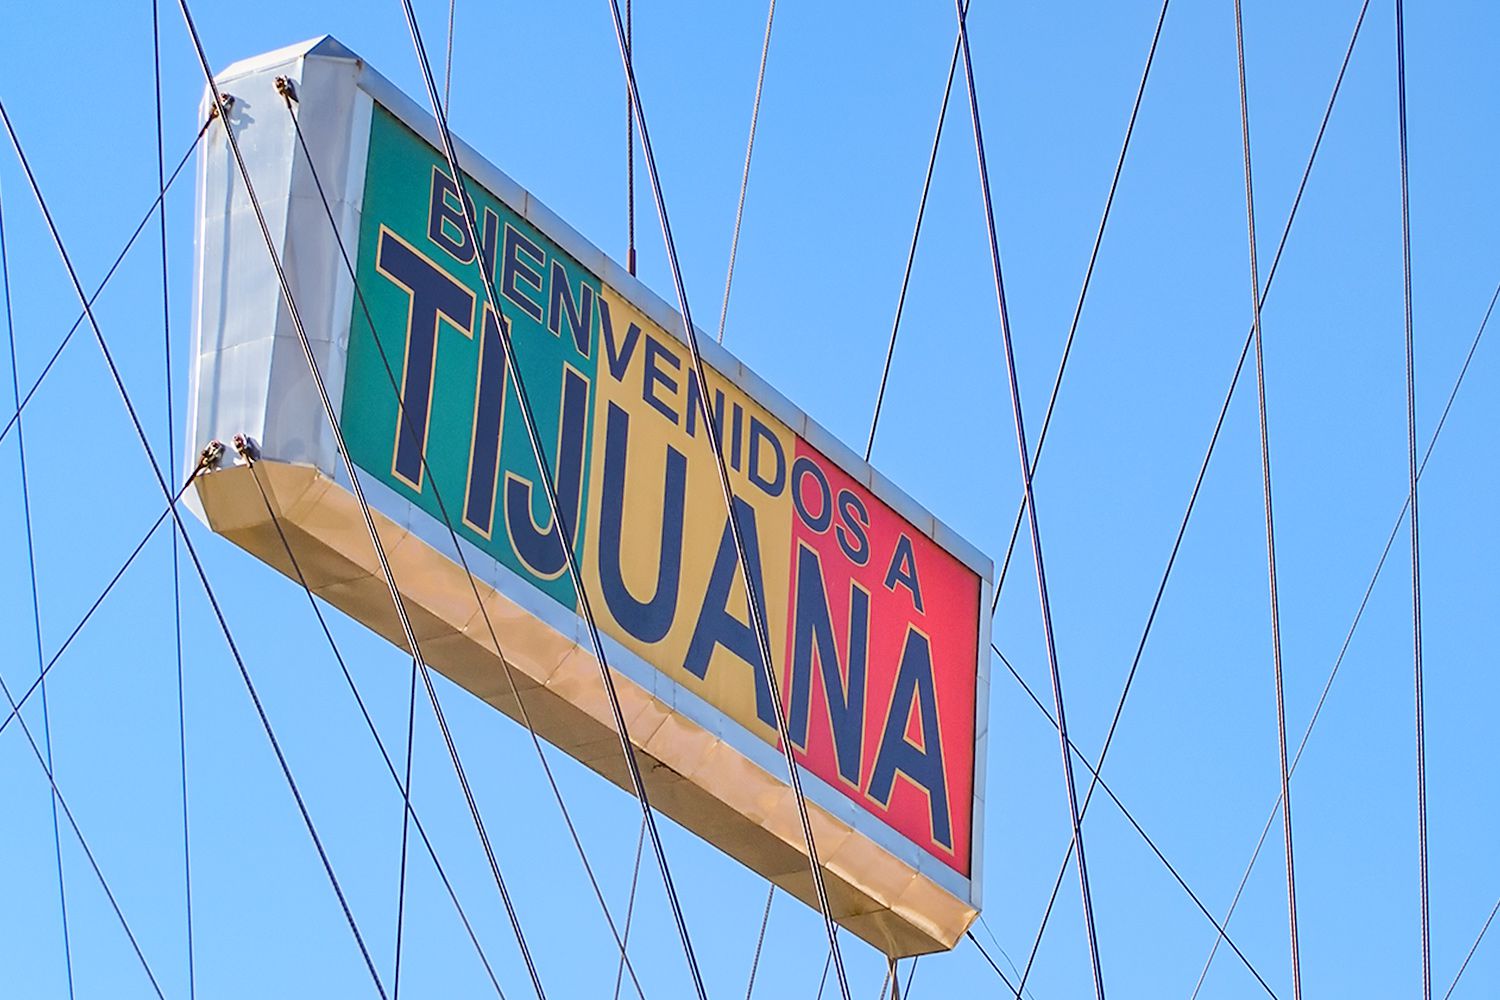 Tijuana Mexico Visitor Guide - What You Need to Know